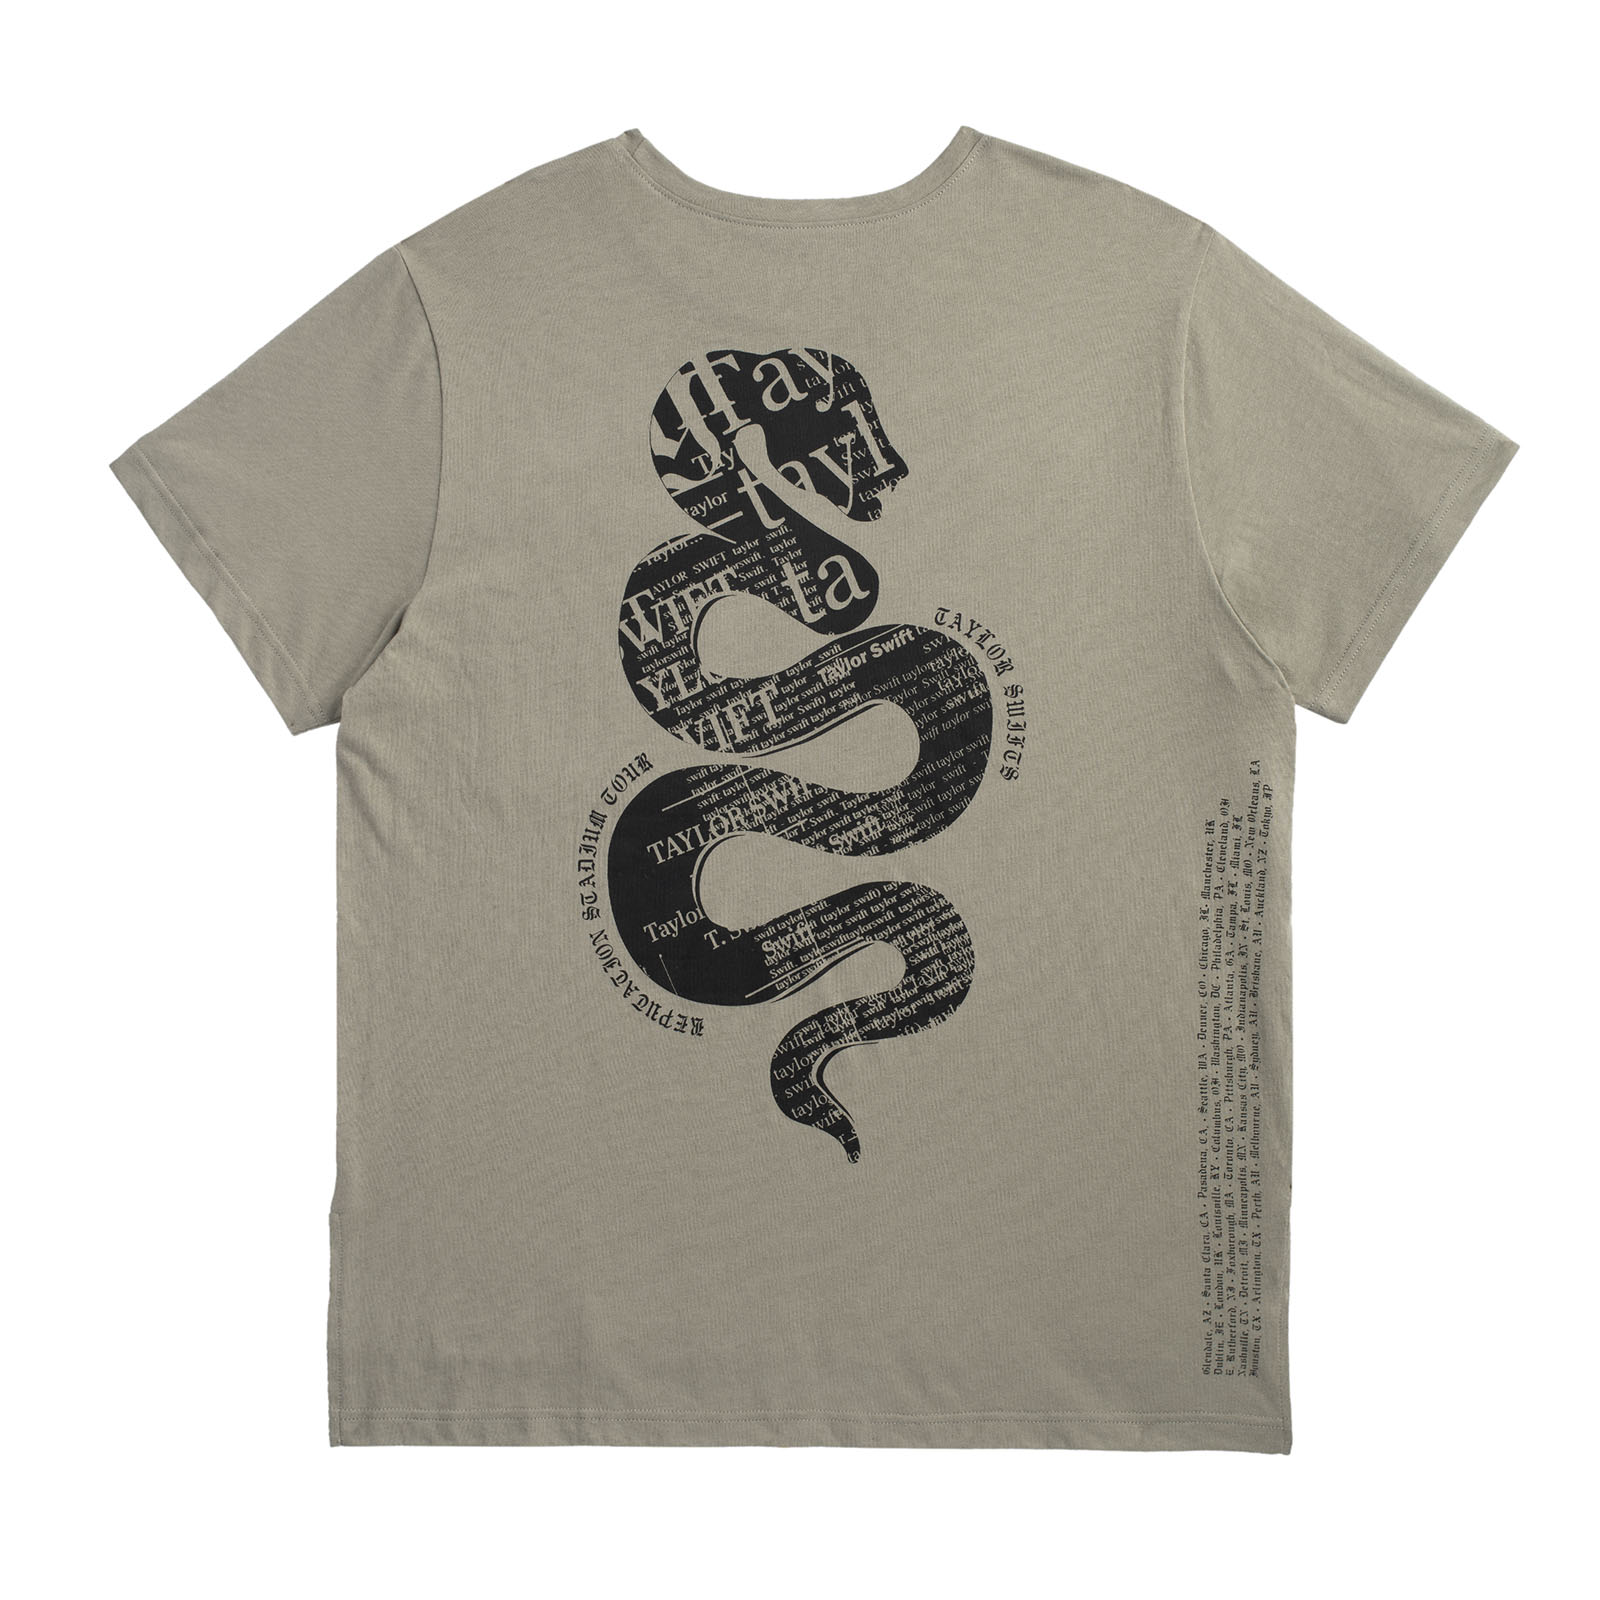 Taylor Swift Unveils Official Merchandise For Her 'Reputation' Stadium Tour | Fashion ...1600 x 1600